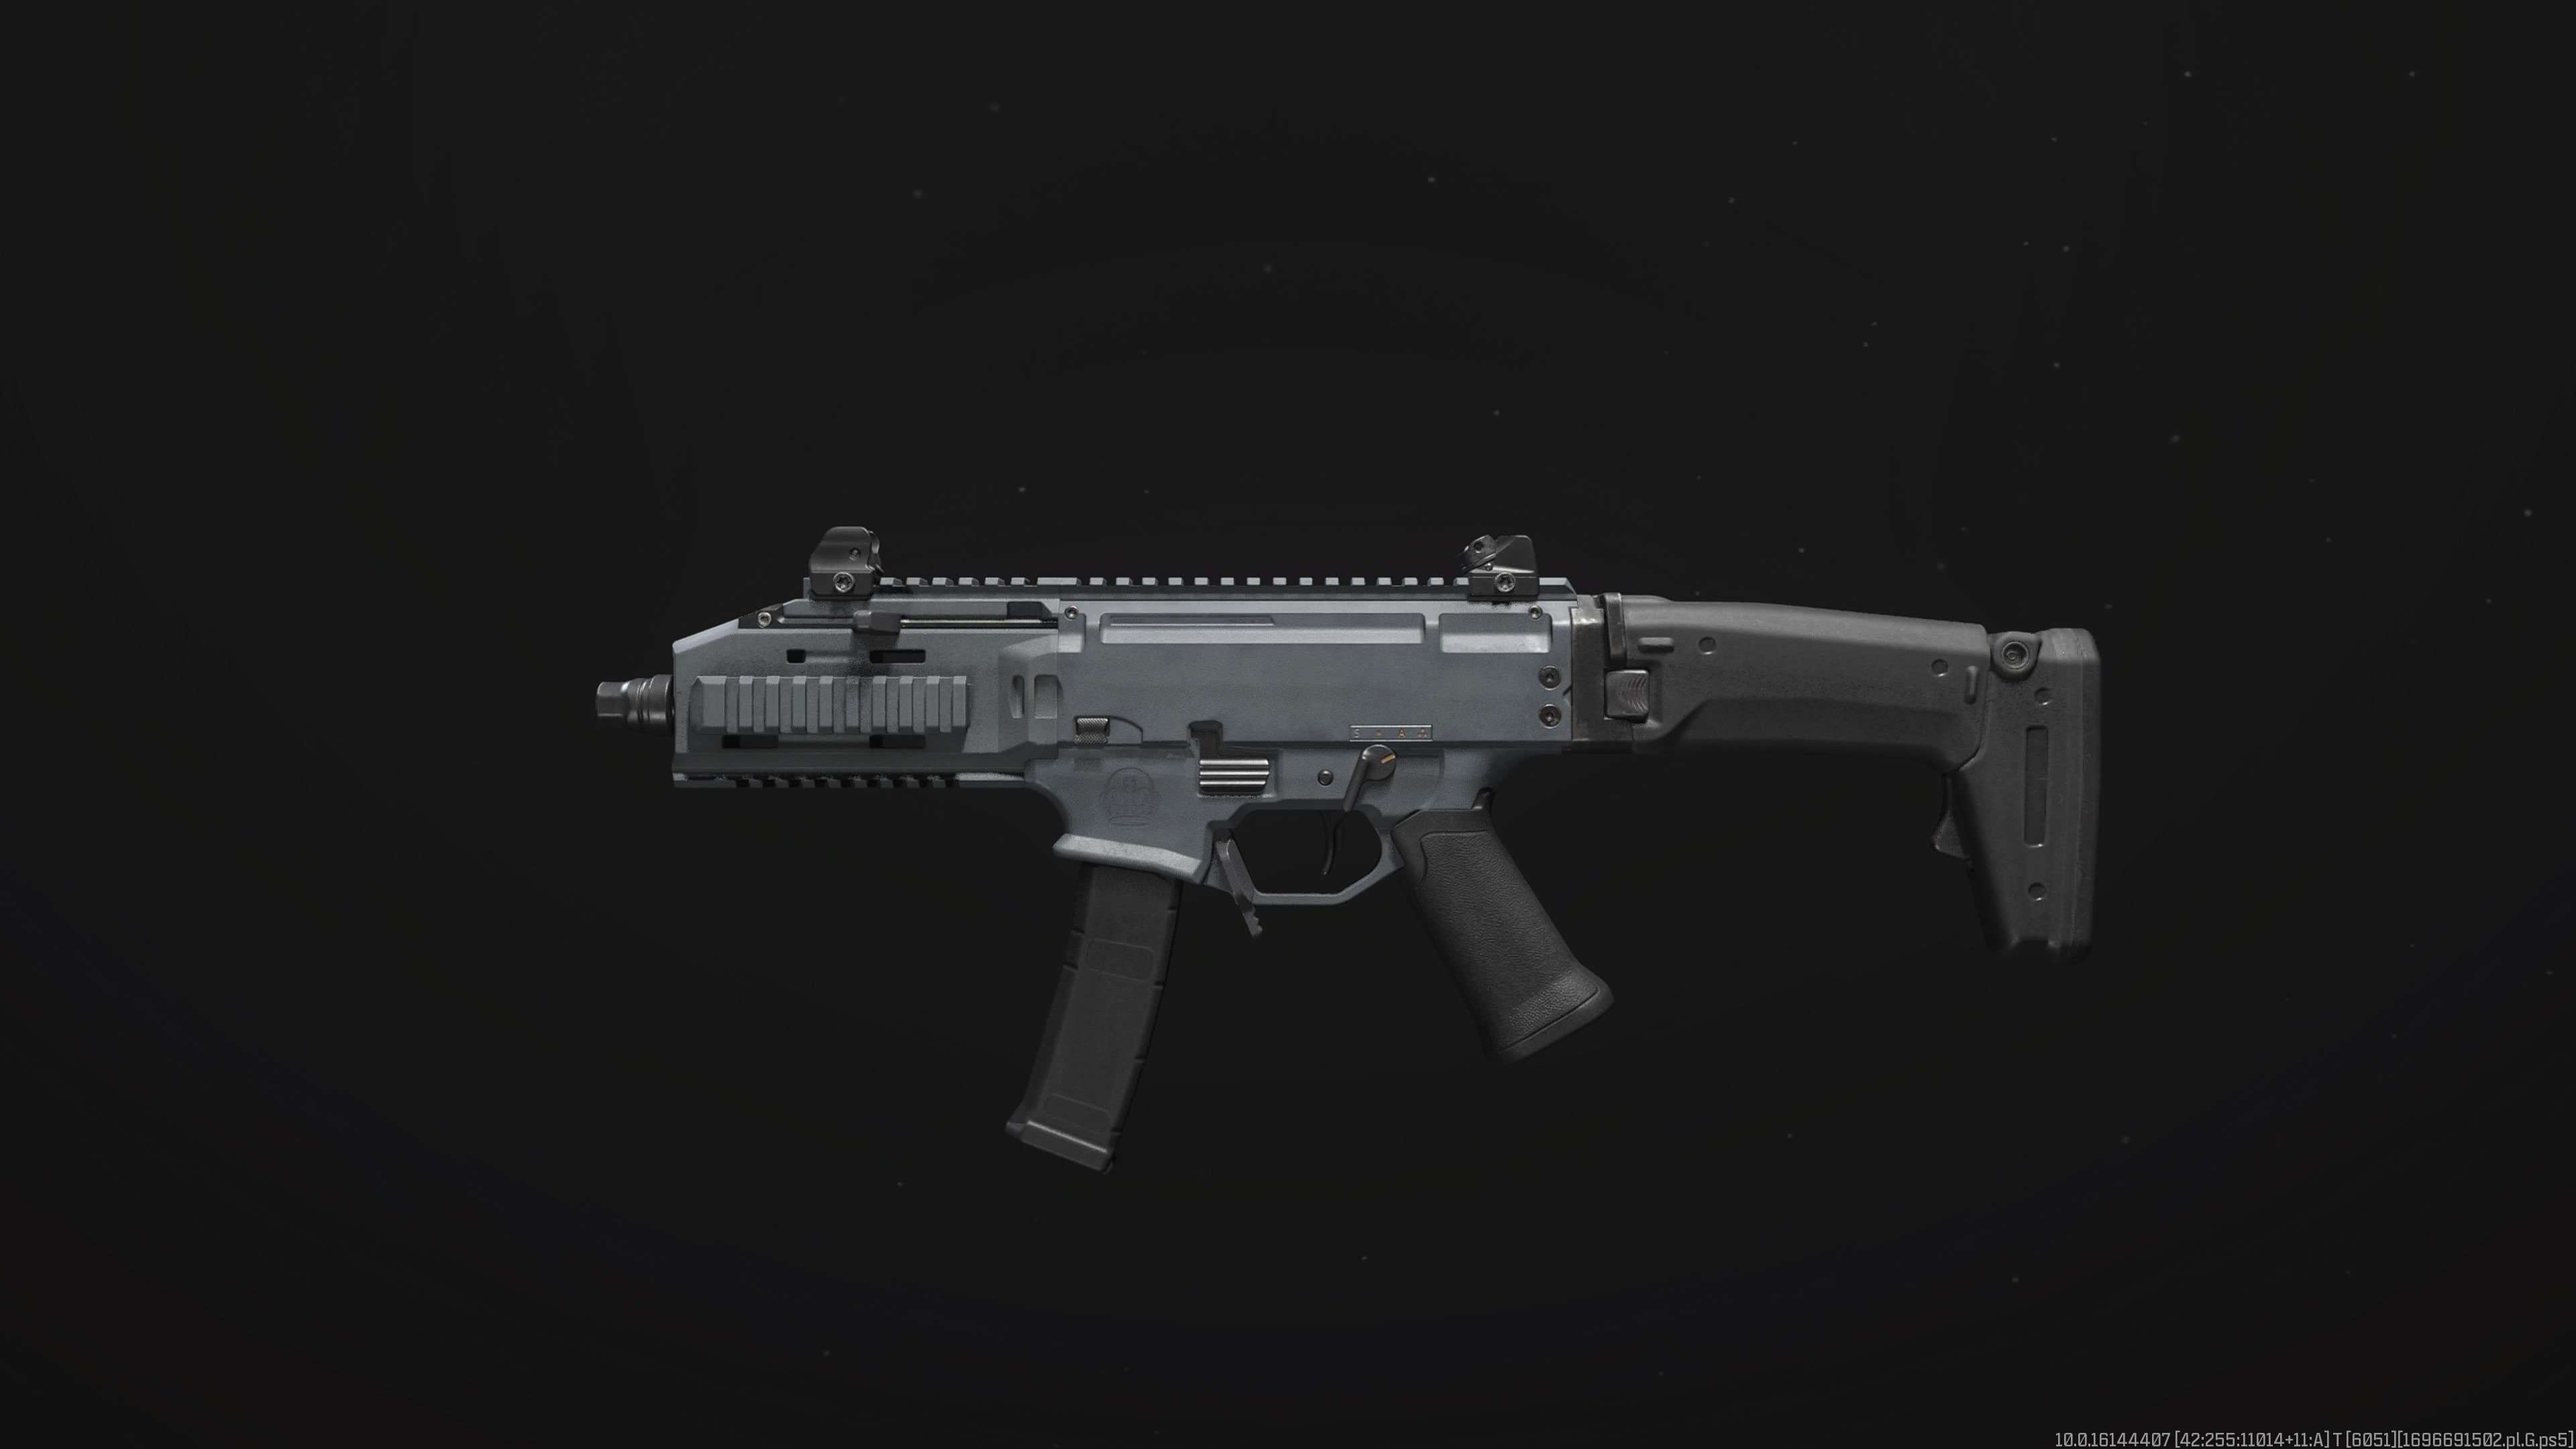 A screenshot of the Rival-9 SMG in MW3.